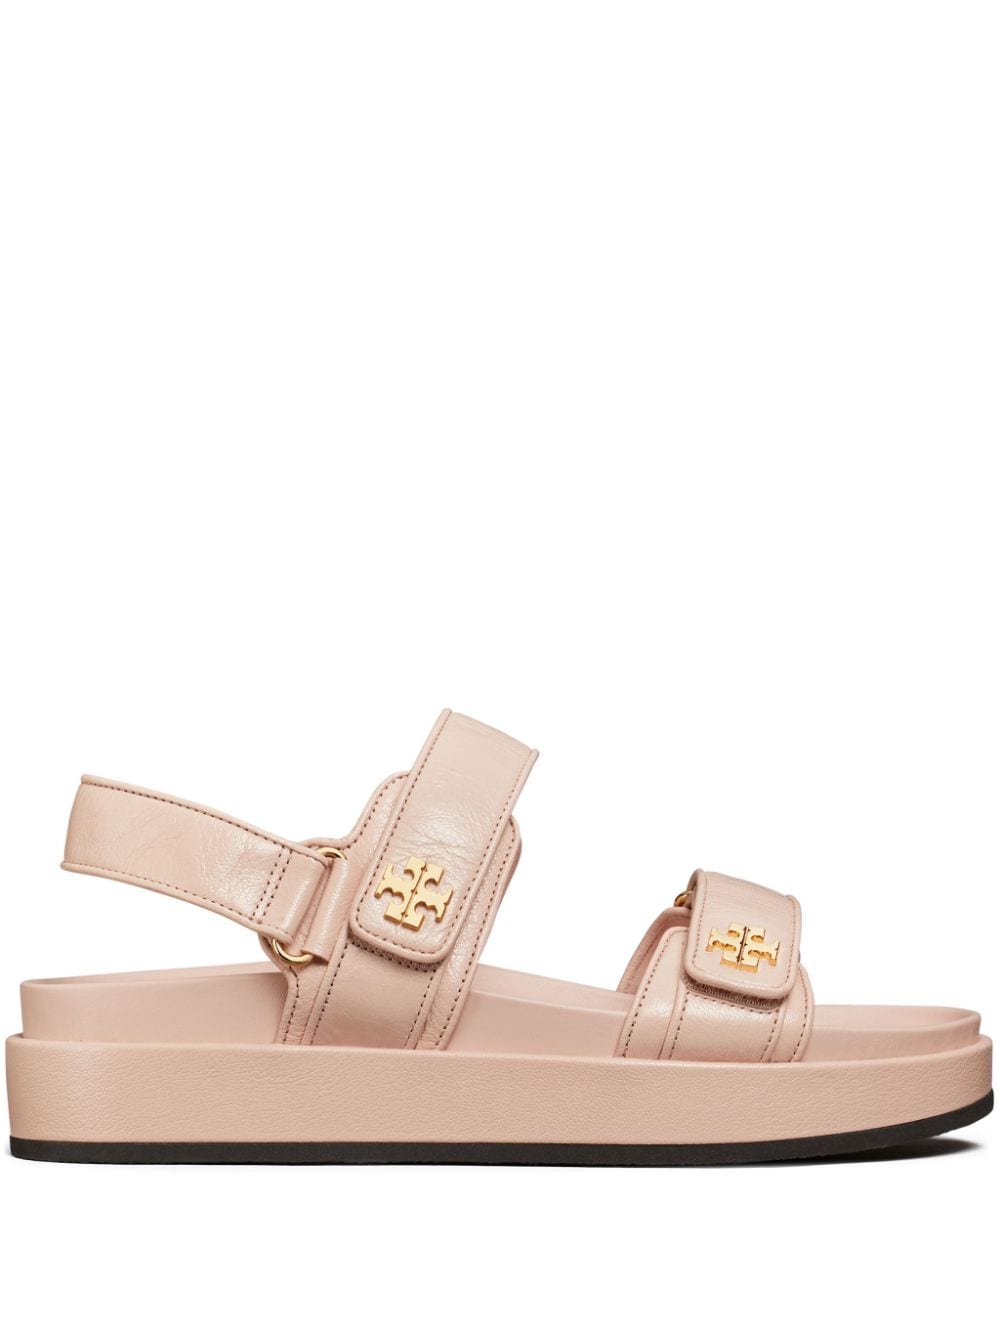 Tory Burch TORY BURCH- Ines Leather Sandals